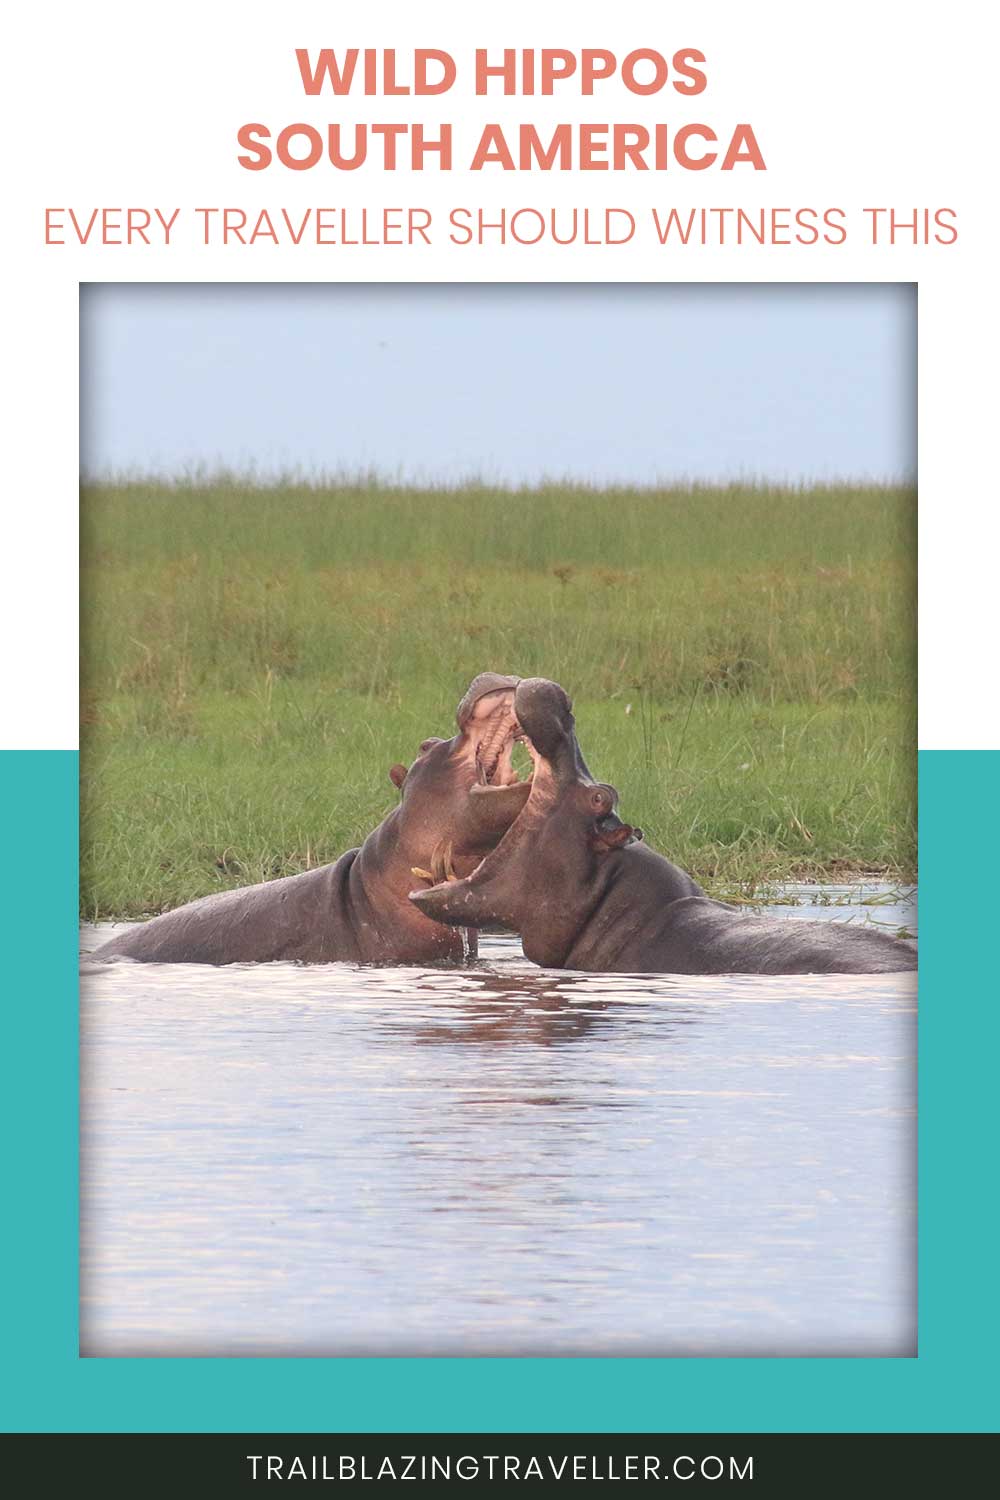 Wild Hippos South America – Every Traveller Should Witness This